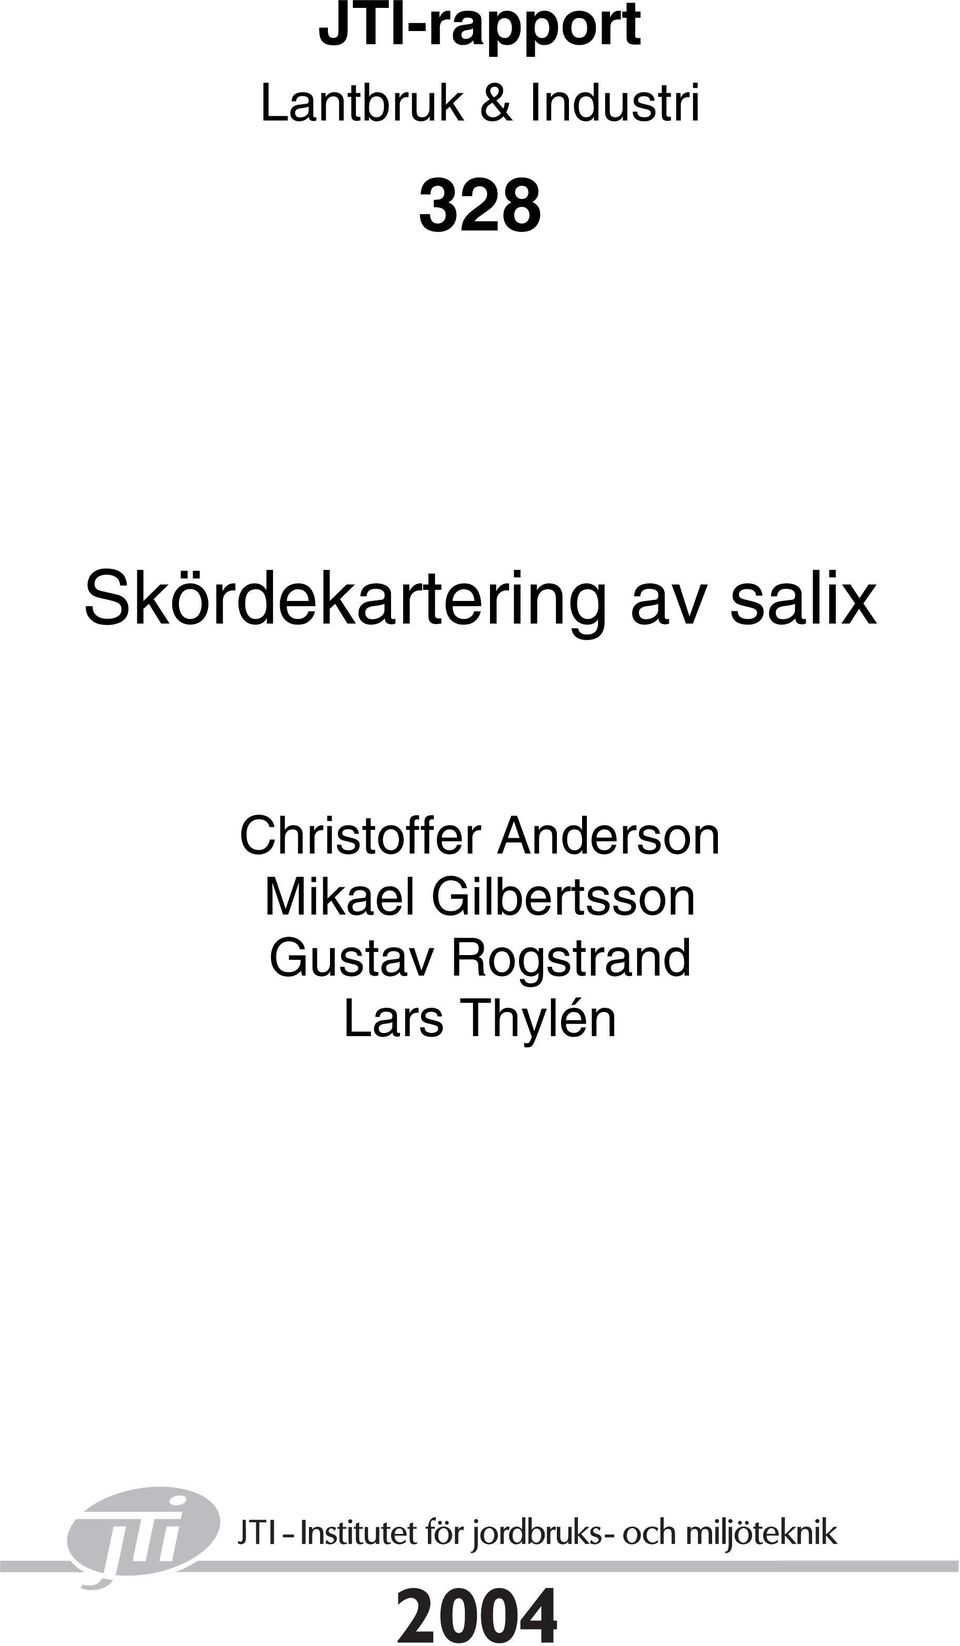 Christoffer Anderson Mikael